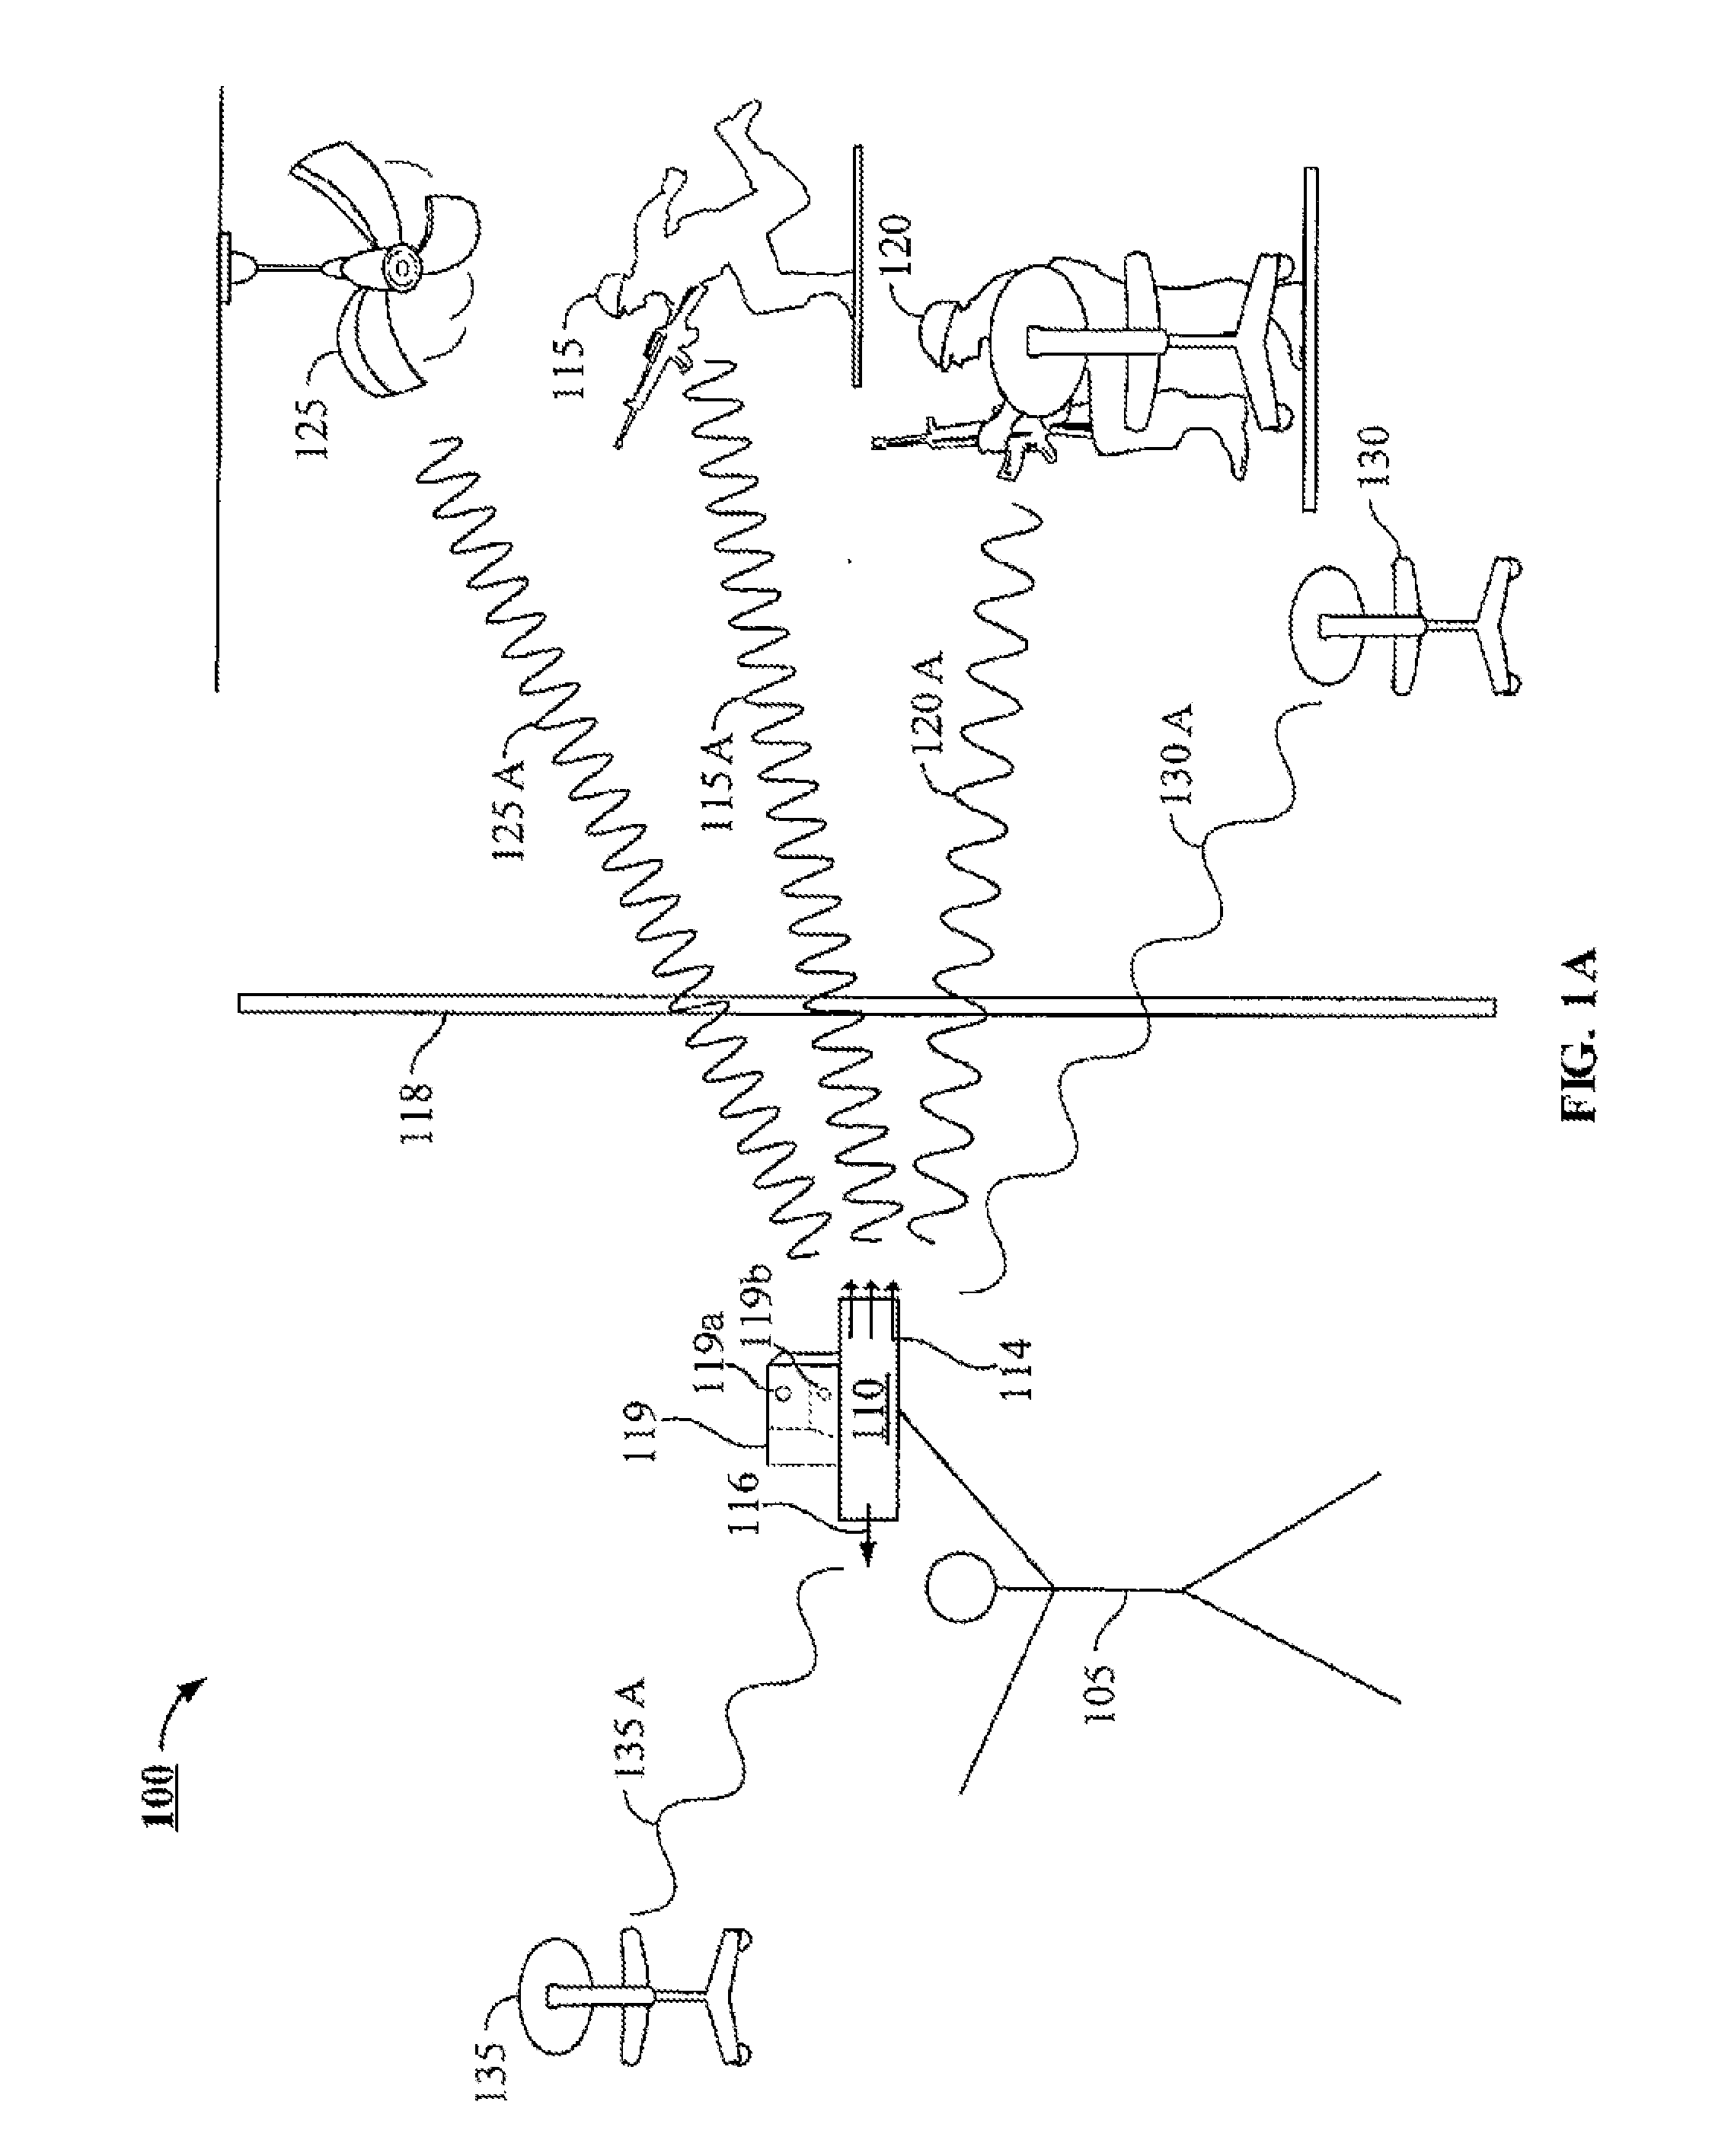 Patient monitoring and surveillance system, methods, and devices